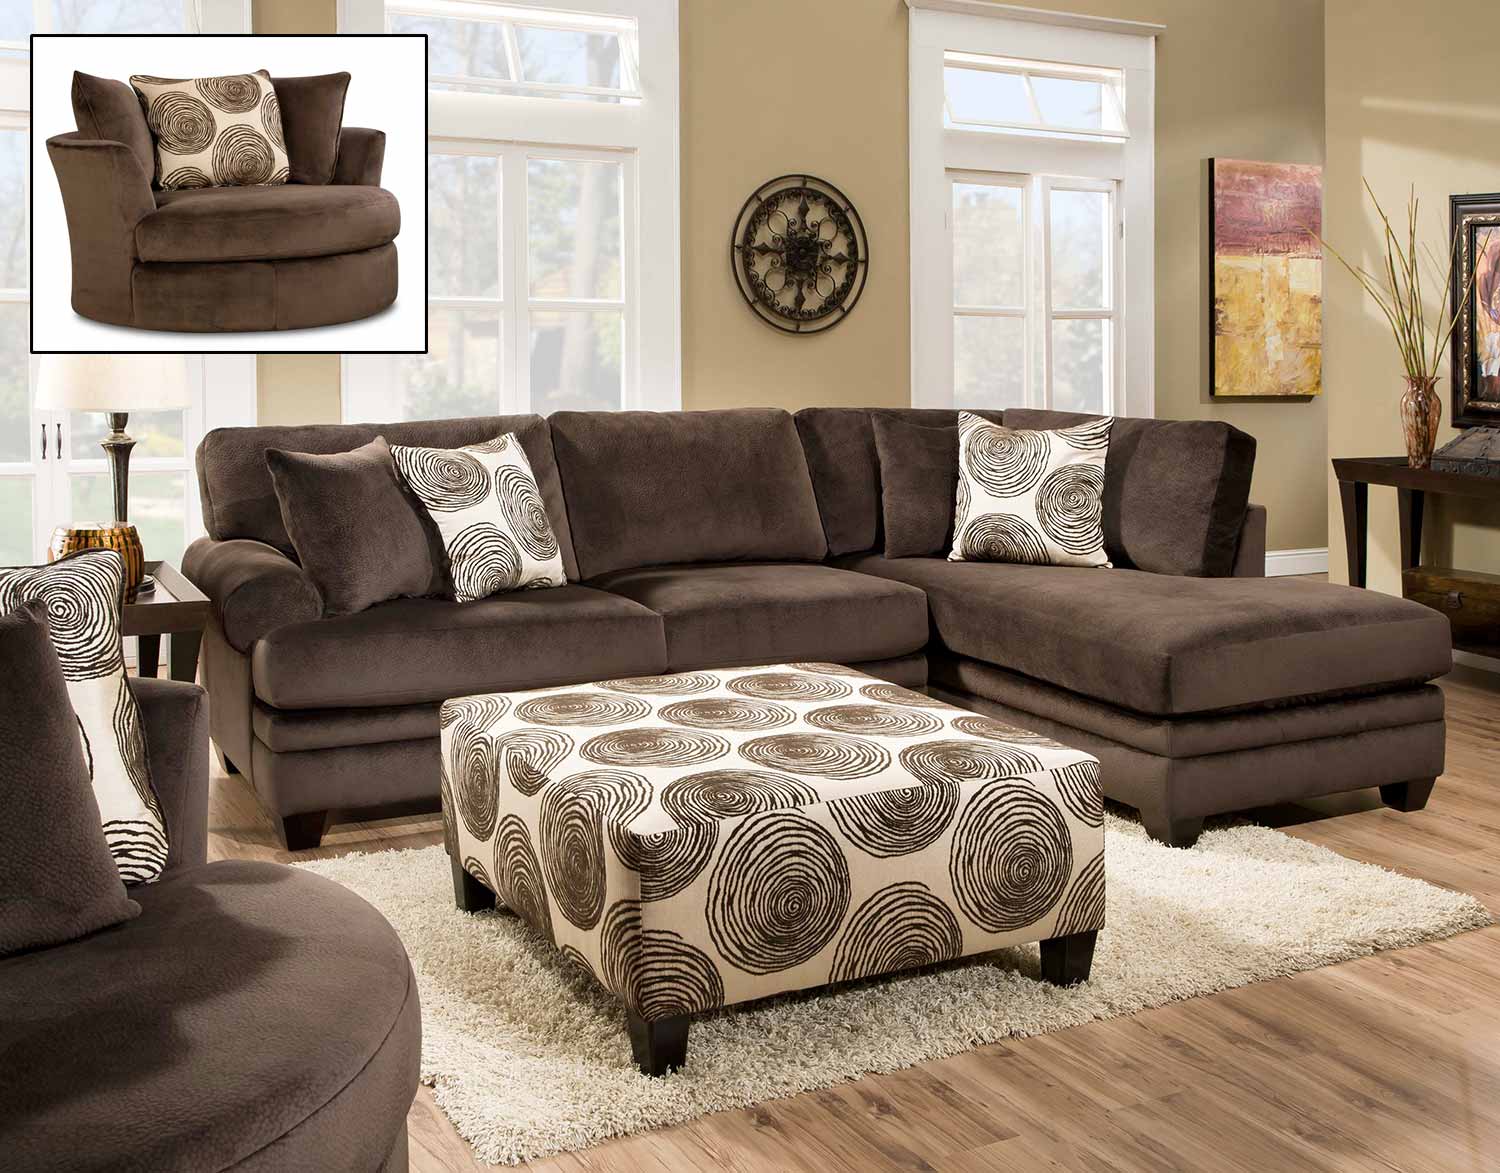 Groovy Chocolate Sectional